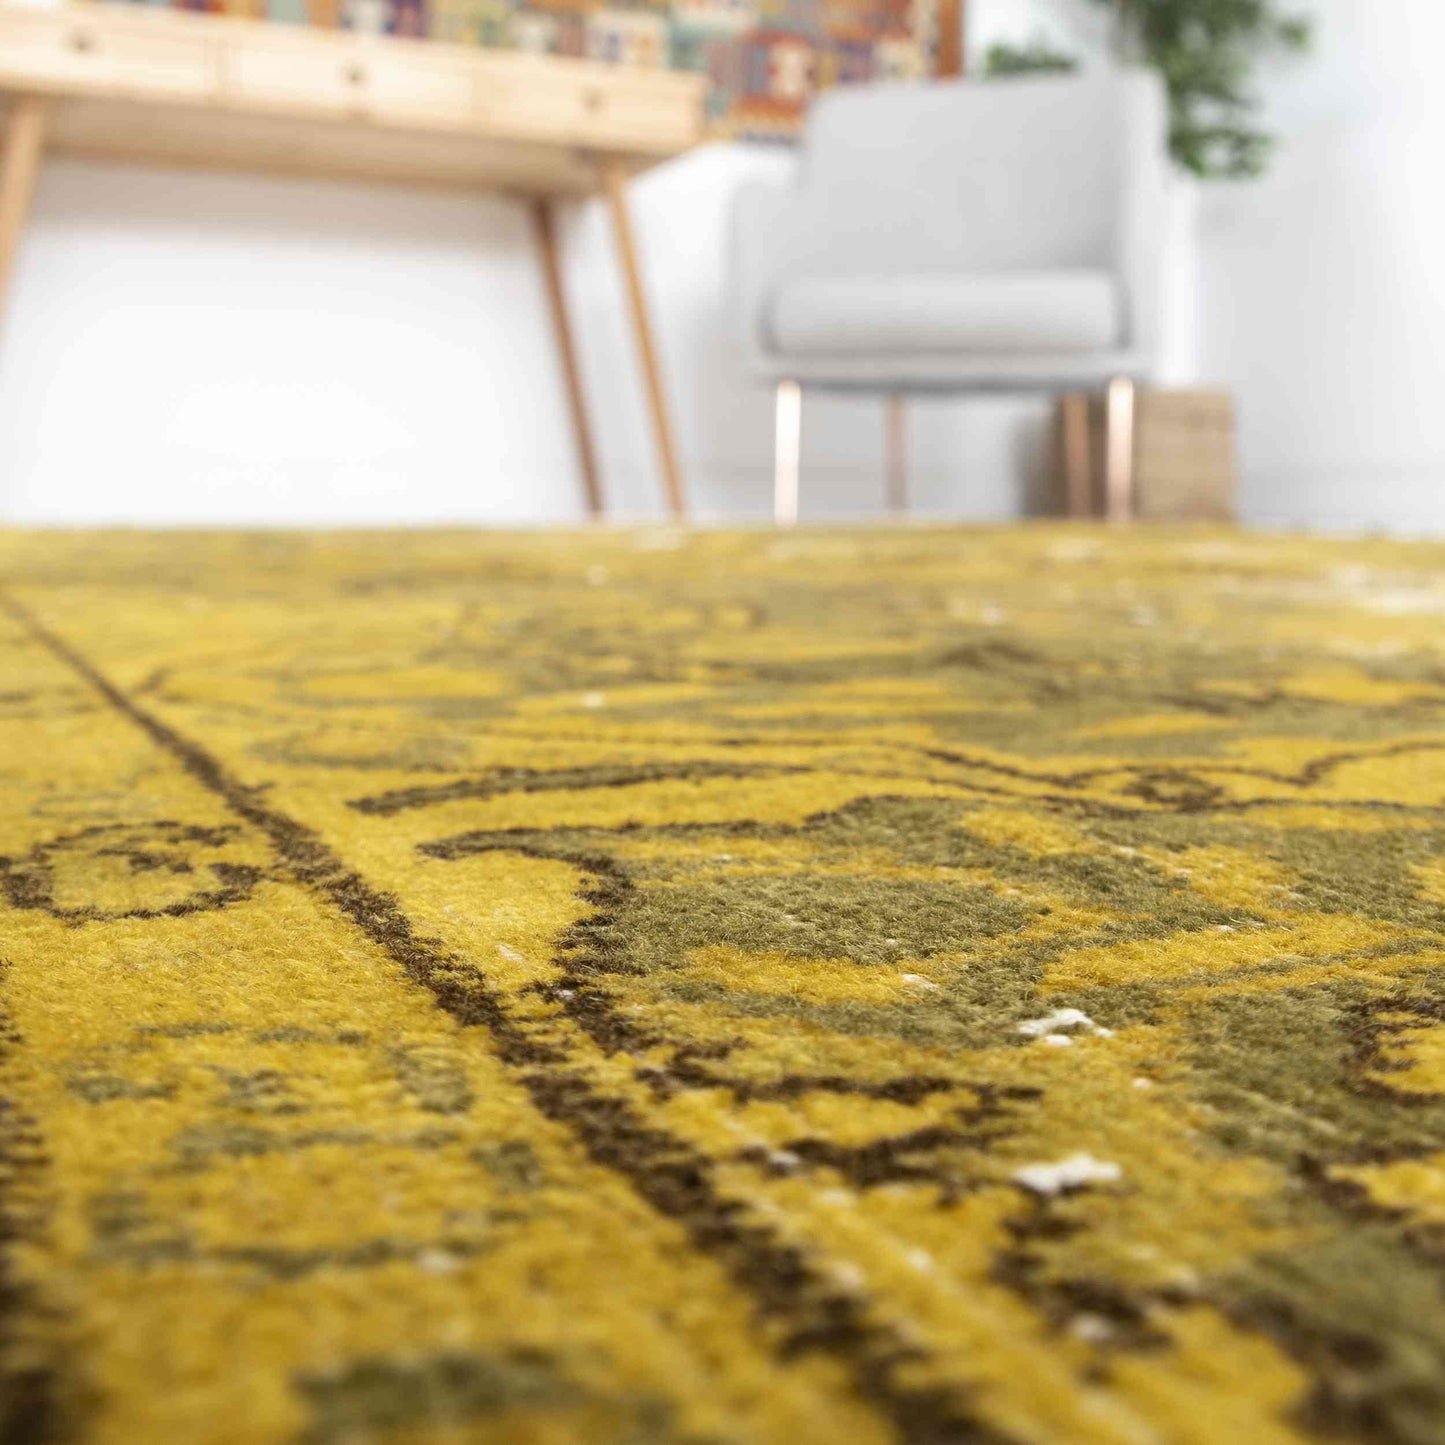 Oriental Rug Vintage Hand Knotted Wool On Cotton 169 x 266 Cm - 5' 7'' x 8' 9'' Yellow C006 ER12